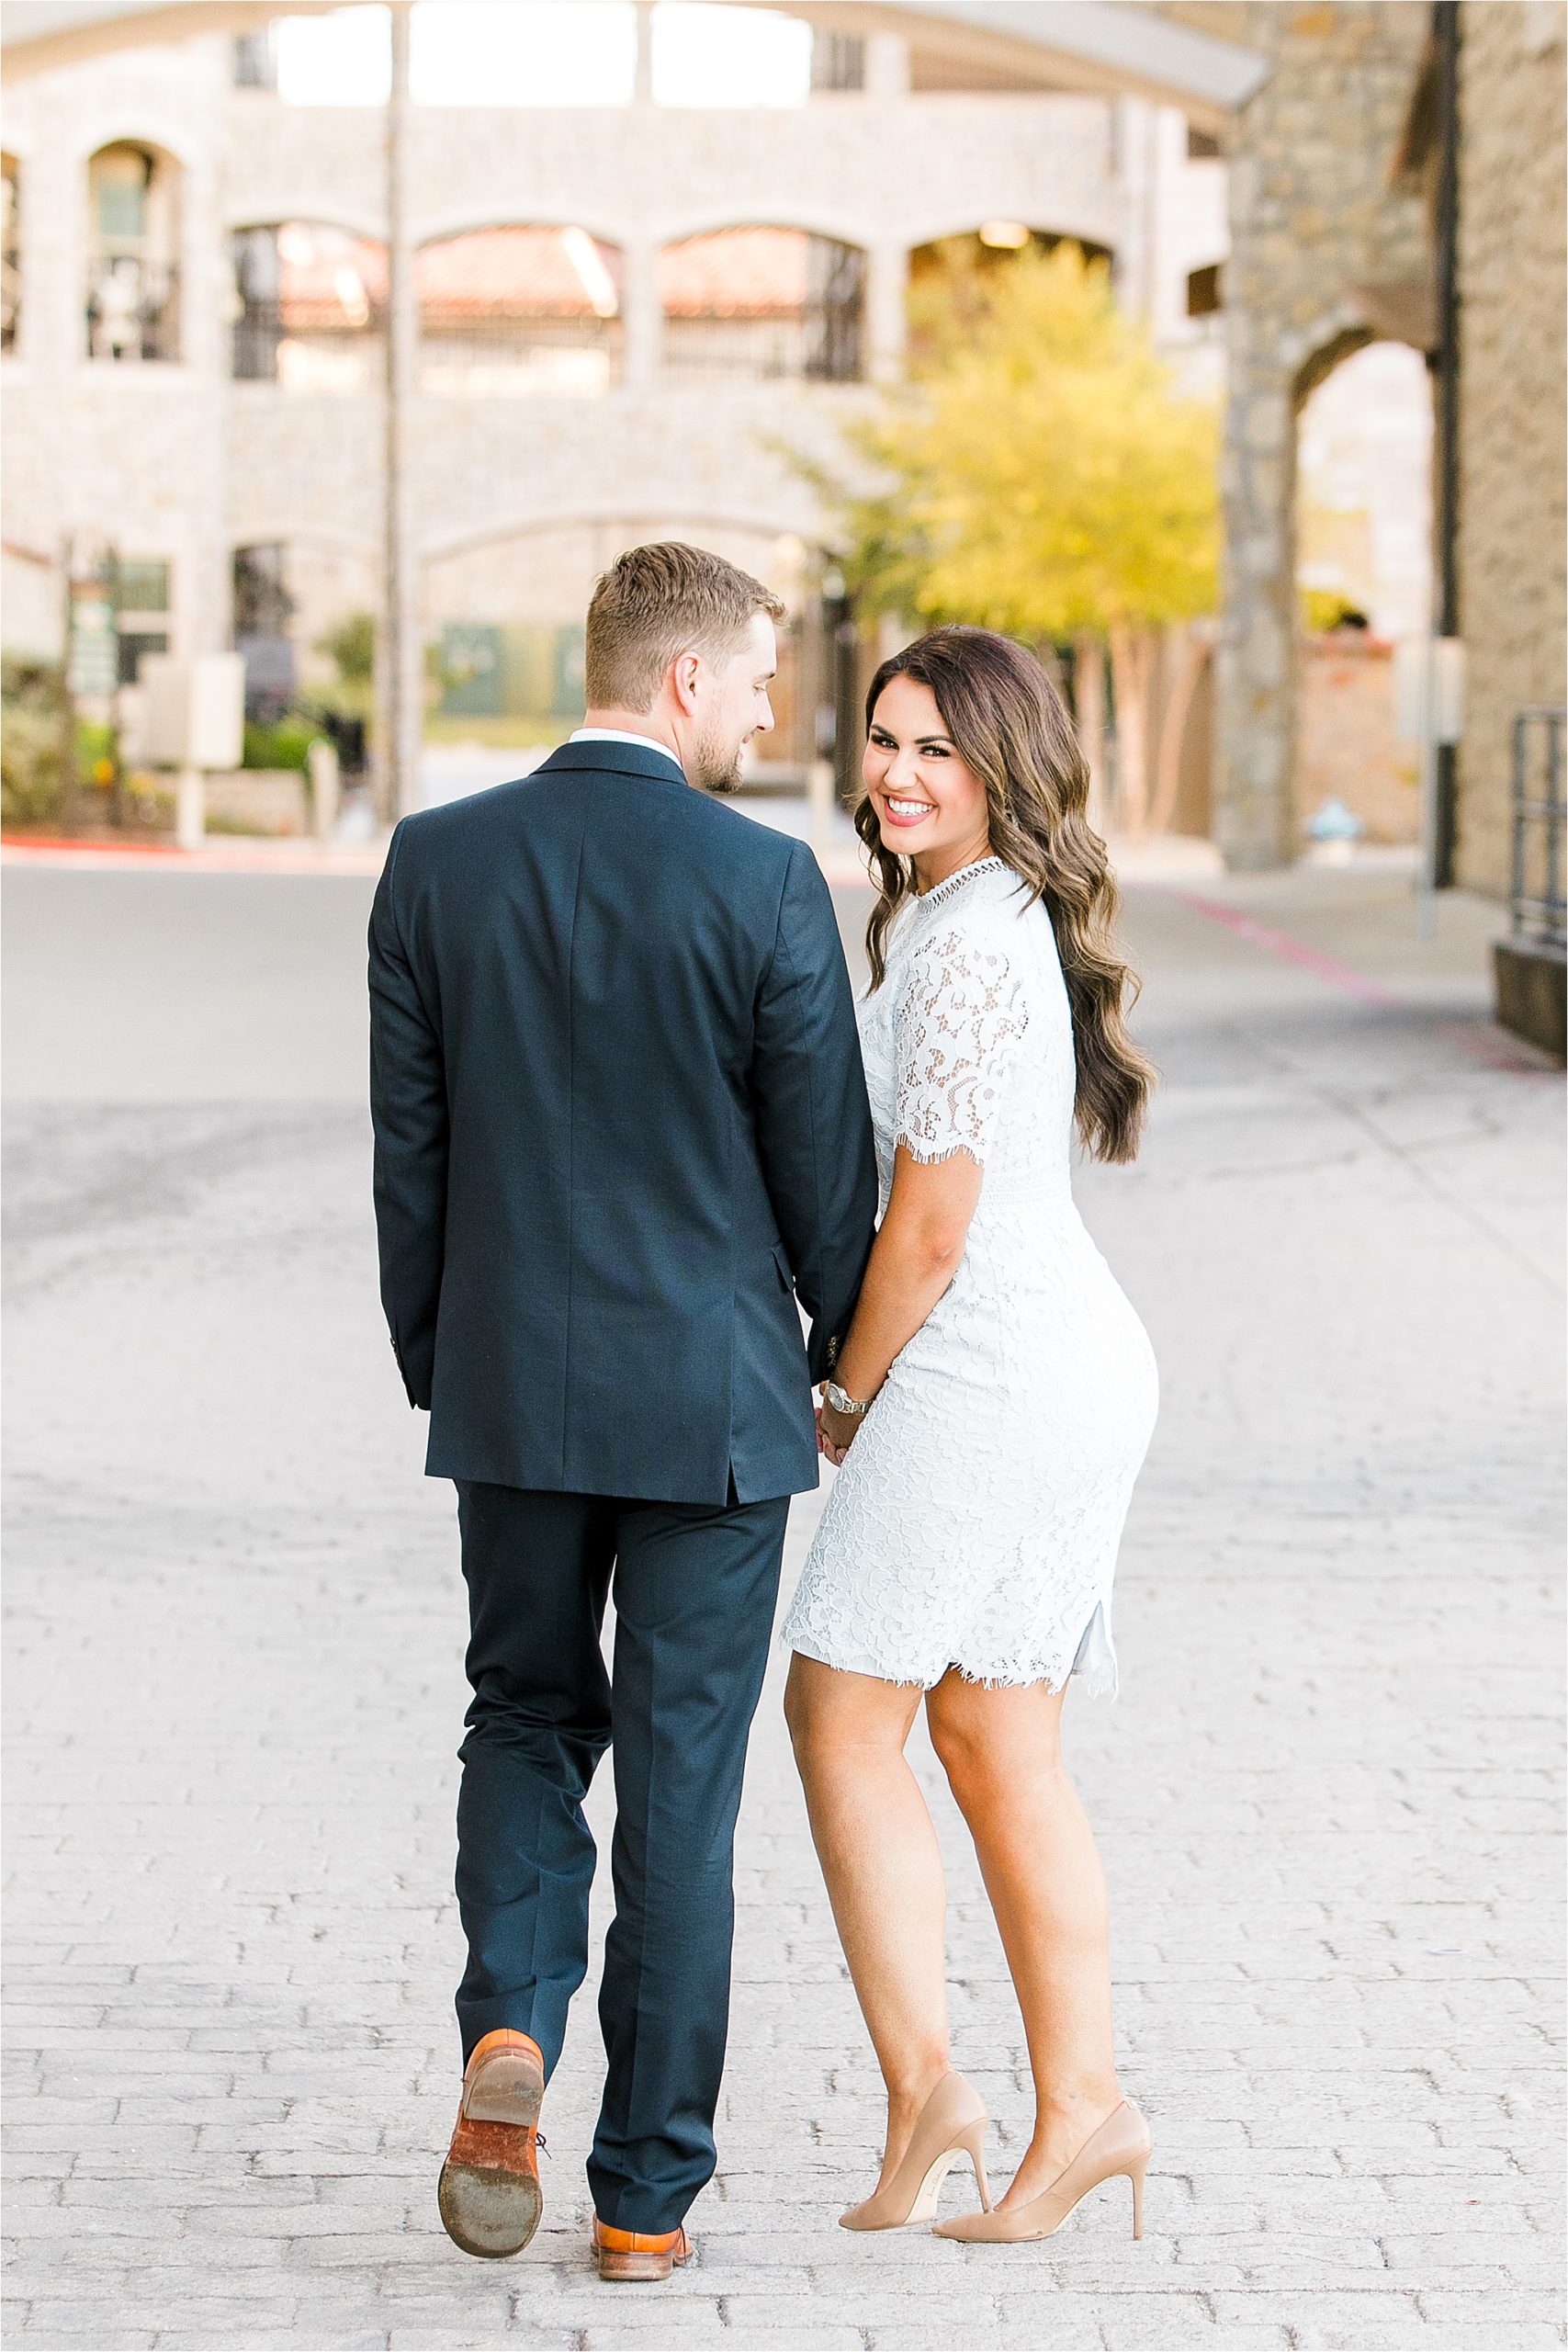 A bride to be holds hands with her fiance as they walk away and she smiles back at the camera while he looks at her during their engagement session at adriatica village in McKinney, Texas 